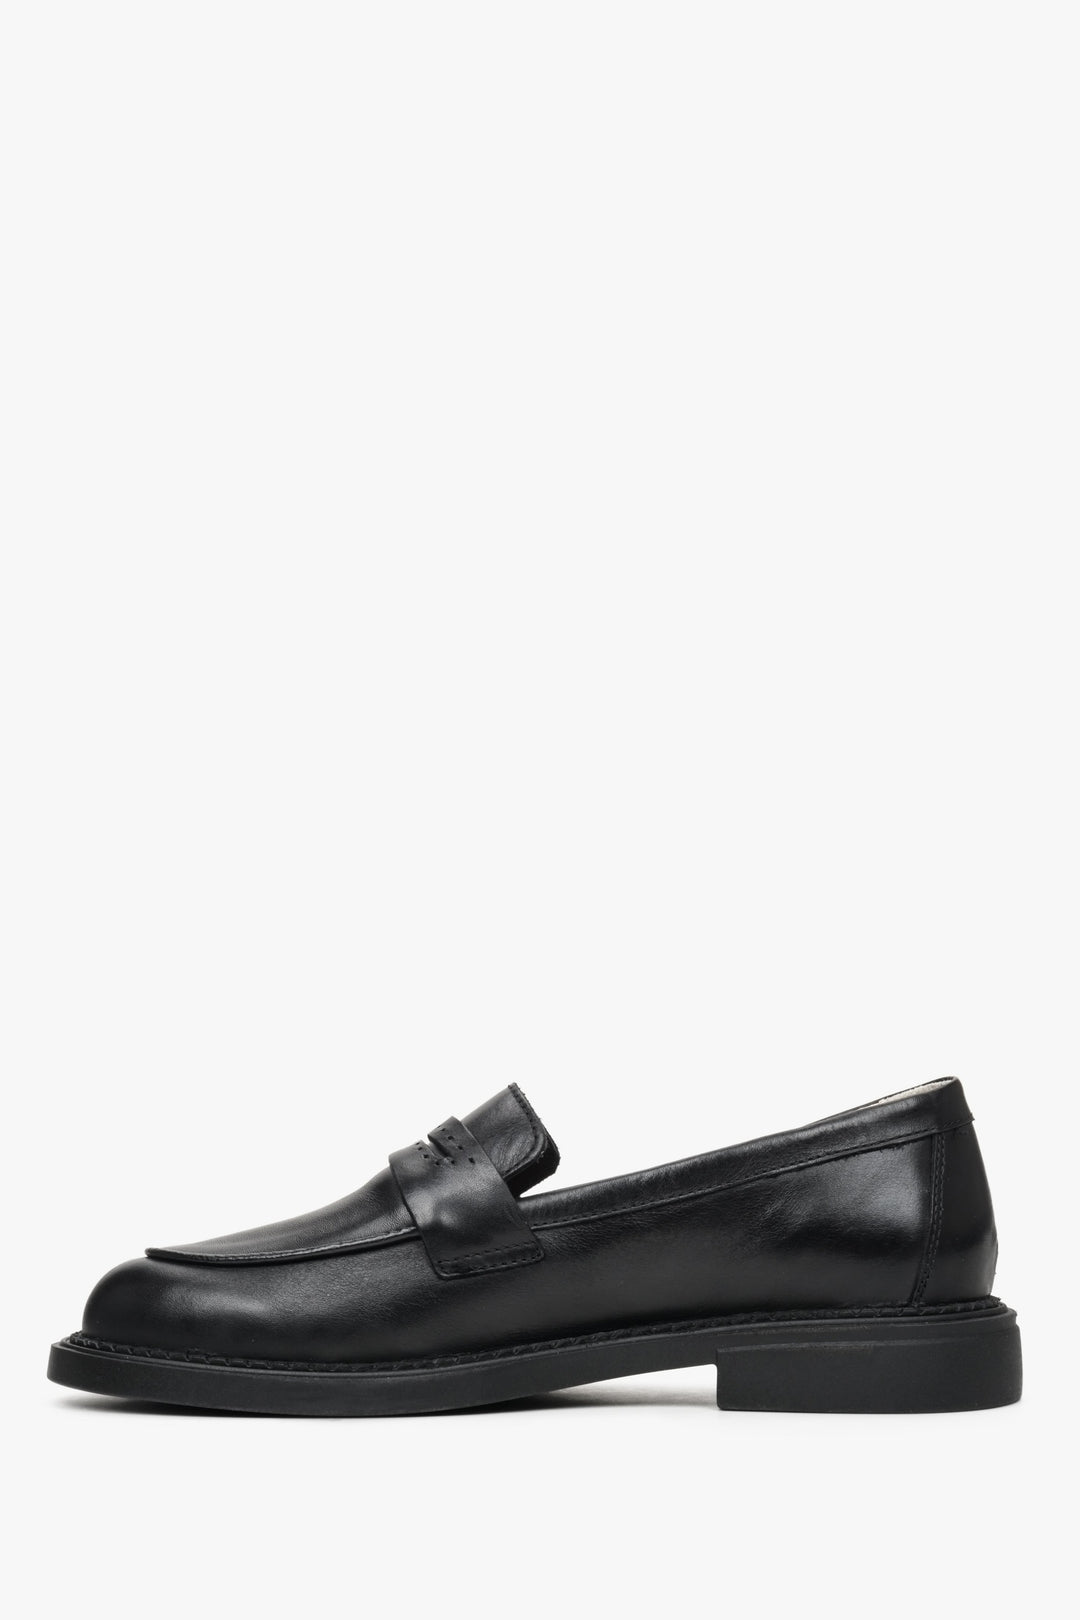 Women's leather loafers in black color by Estro - shoe profile.